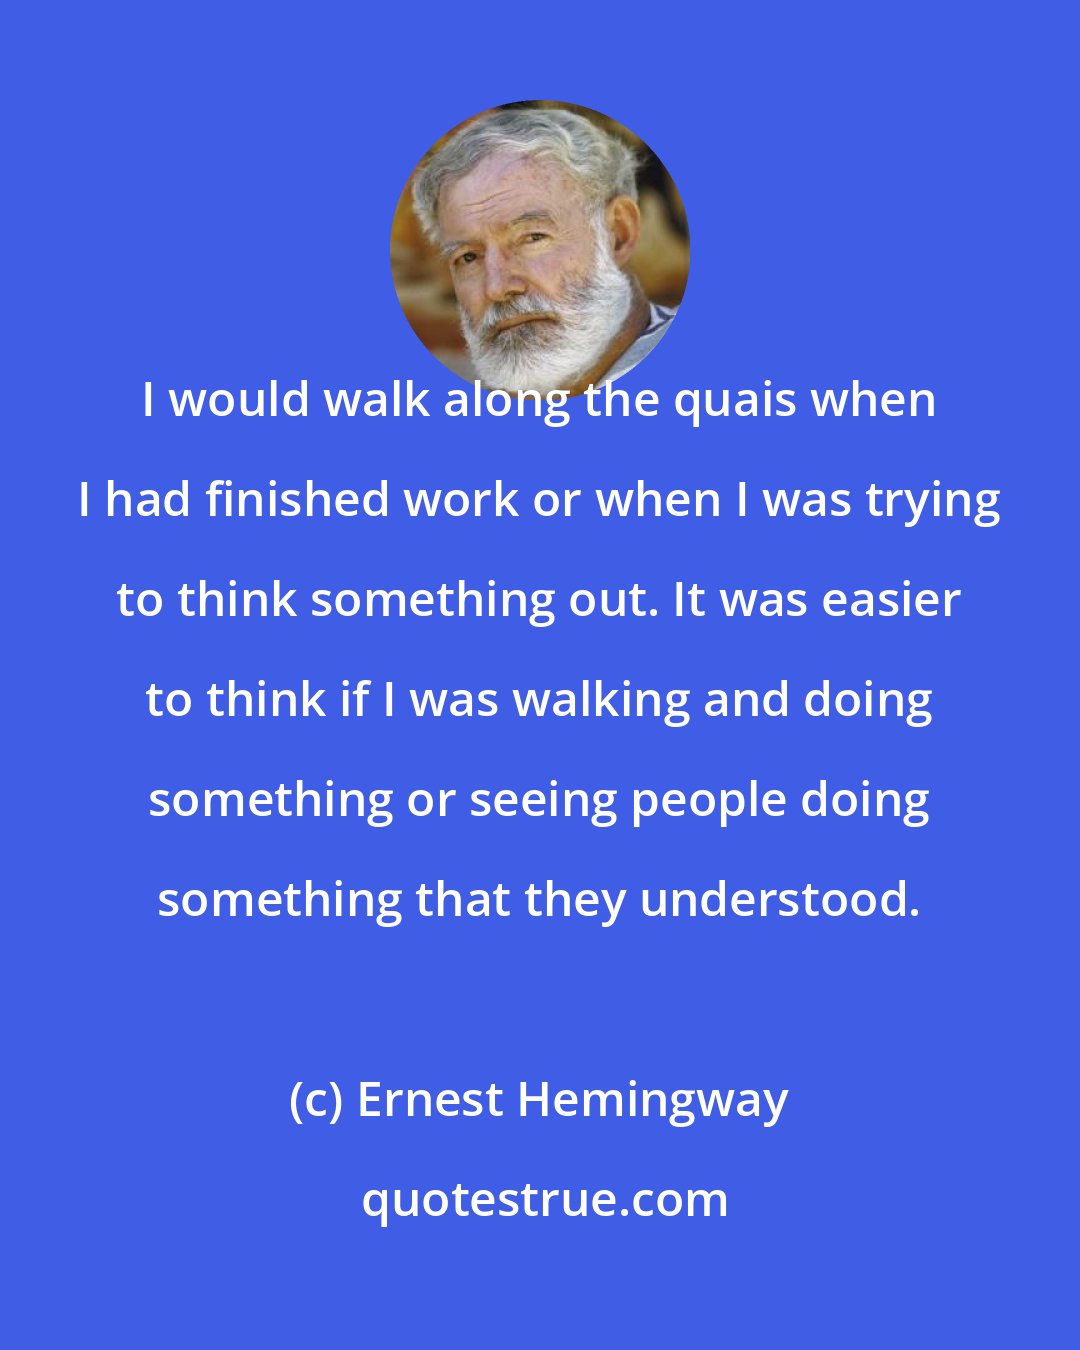 Ernest Hemingway: I would walk along the quais when I had finished work or when I was trying to think something out. It was easier to think if I was walking and doing something or seeing people doing something that they understood.